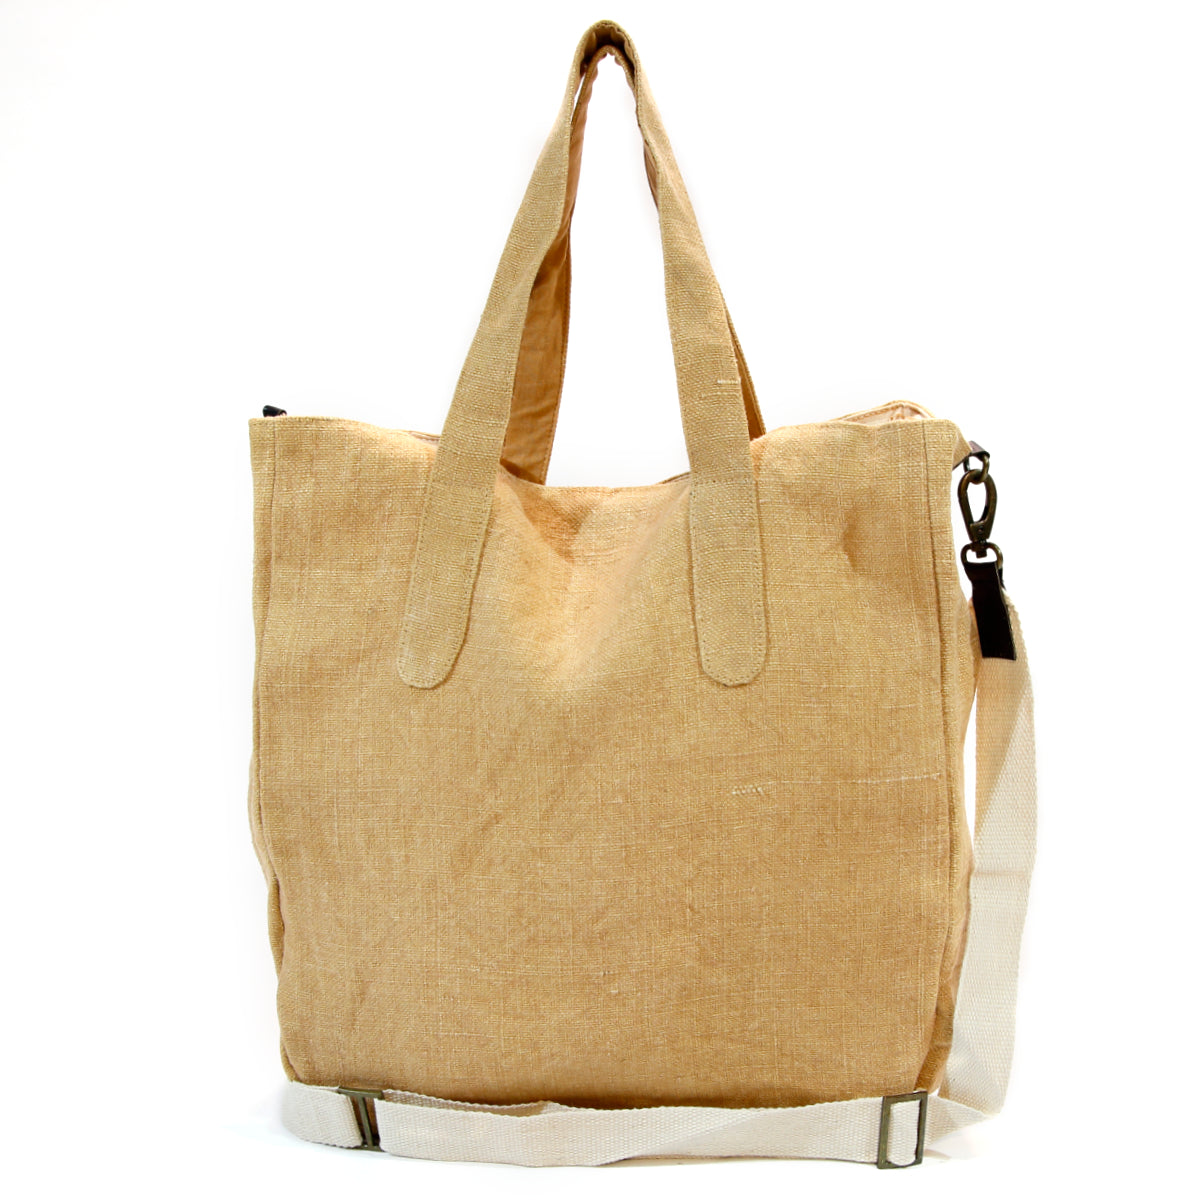 SASSY DUCK CANVAS EXTRA LARGE TOTE BAG